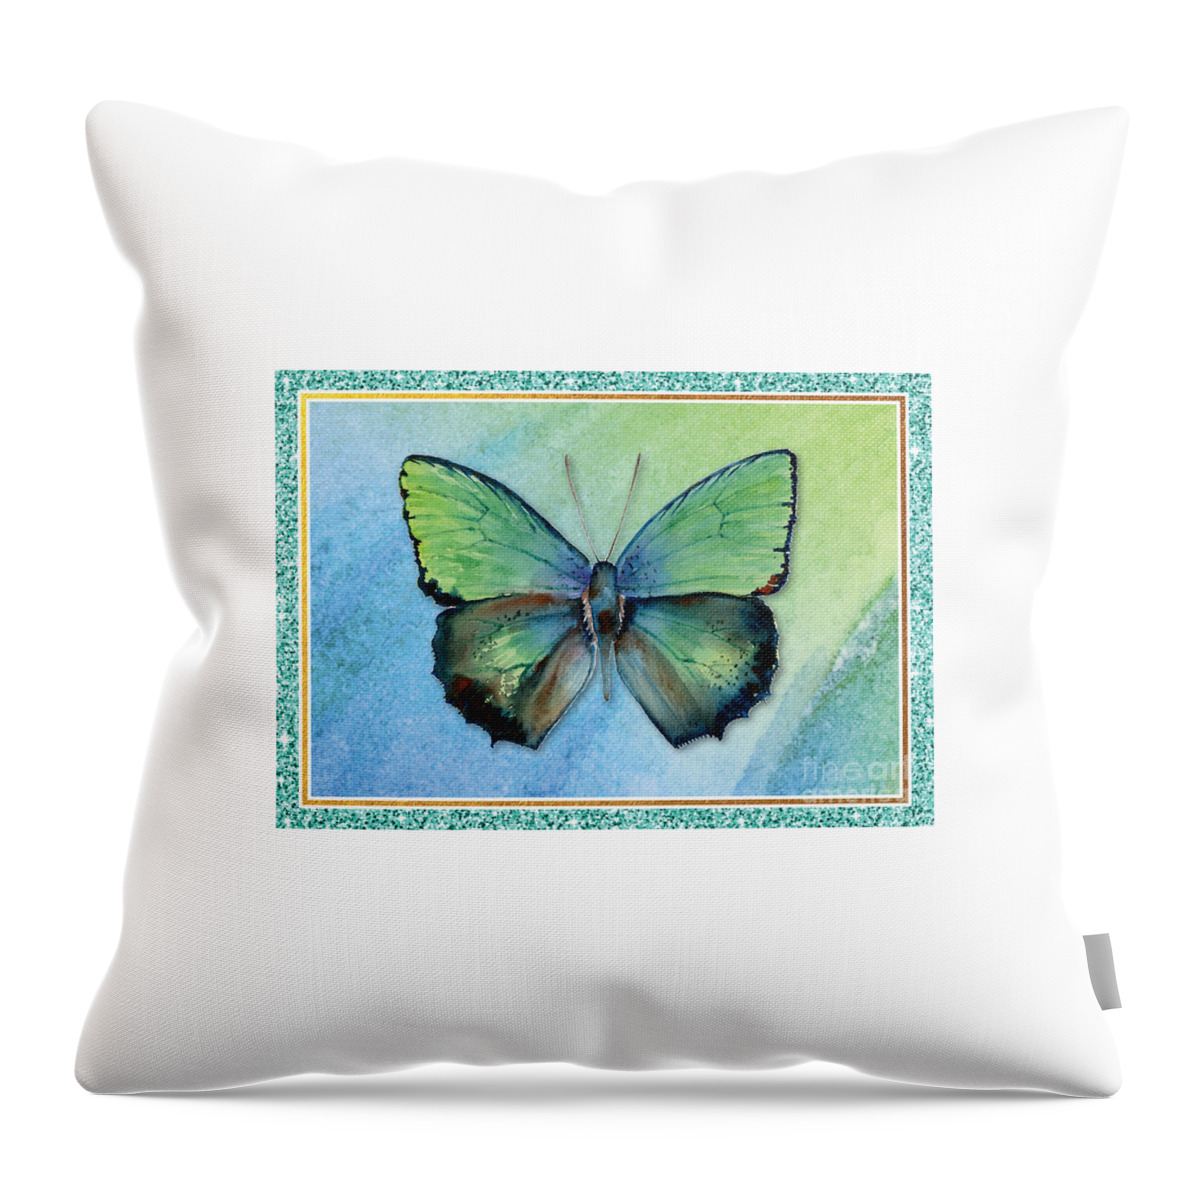 Butterfly Greeting Card Throw Pillow featuring the painting Arhopala Aurea Butterfly by Amy Kirkpatrick